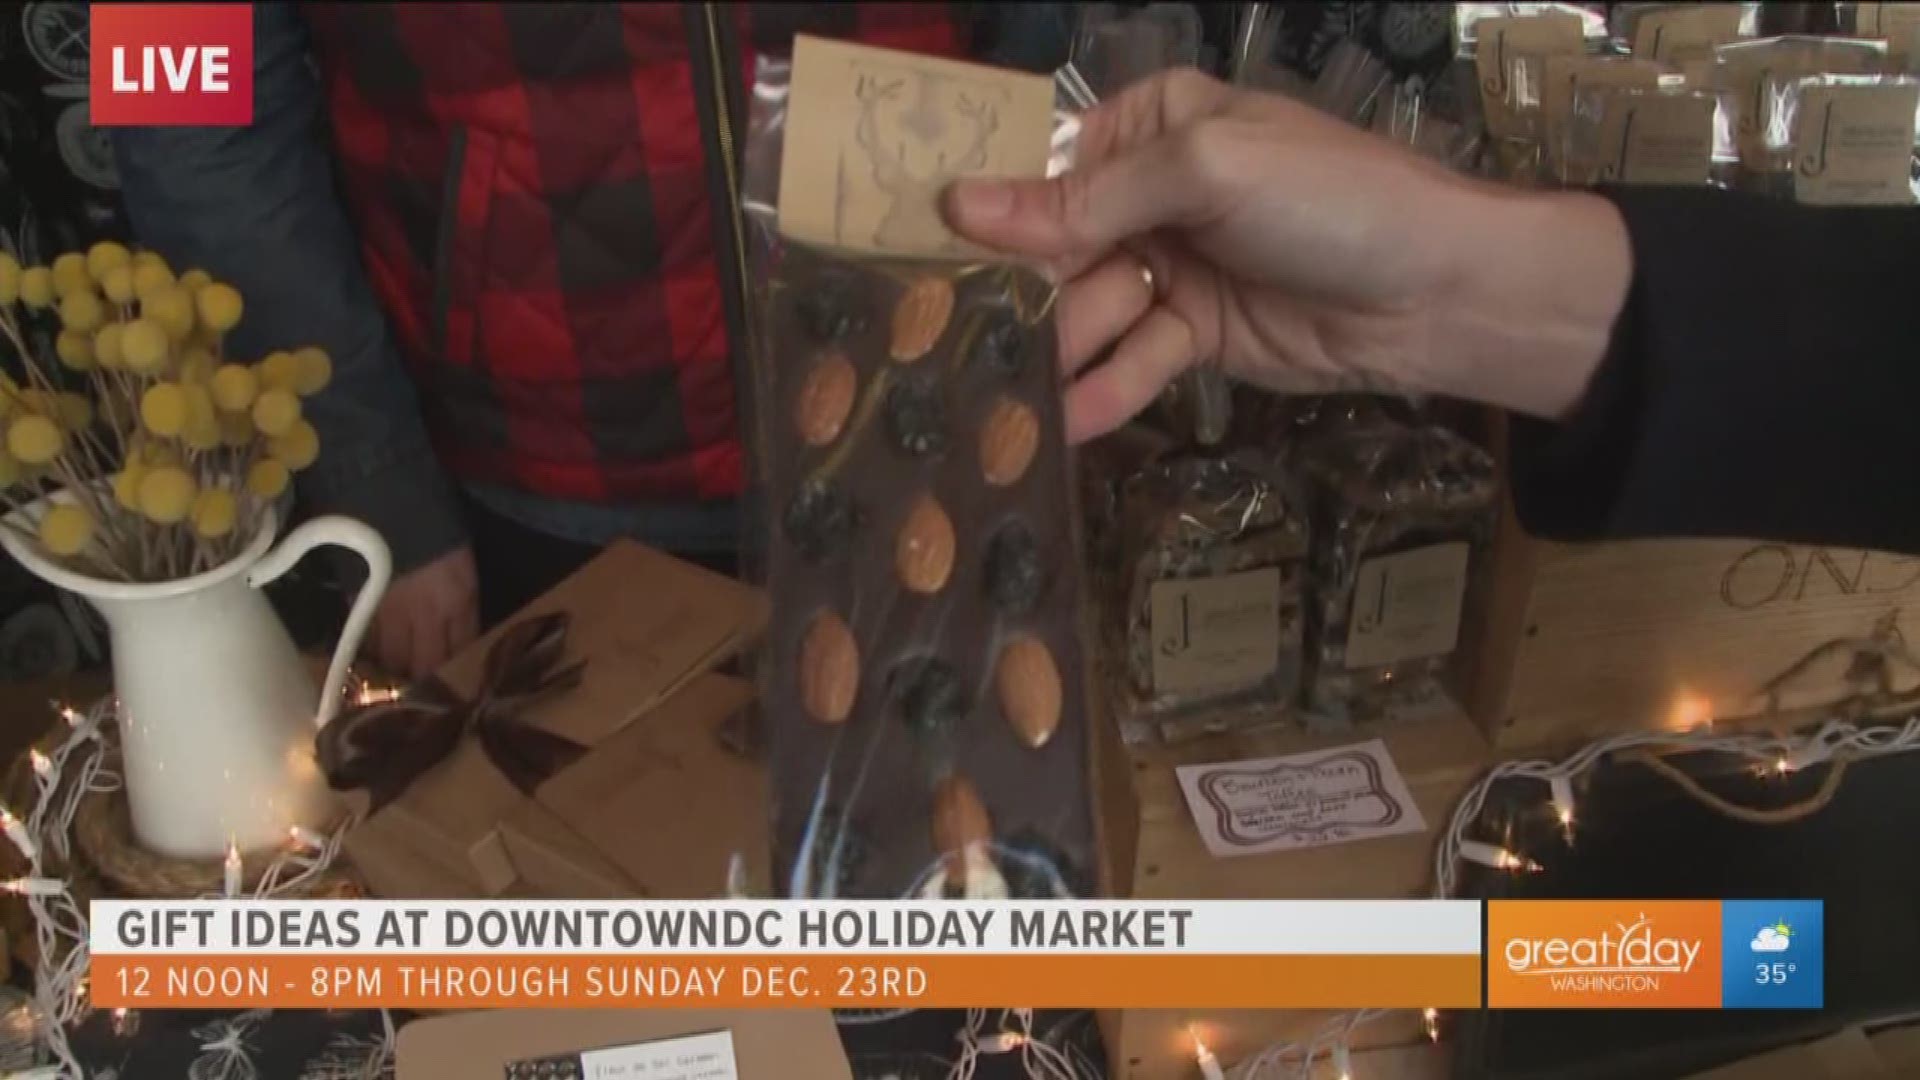 Jane Morris of J Chocolatier shows off her handcrafted chocolate bars available at the holiday market in downtown DC now till December 23.